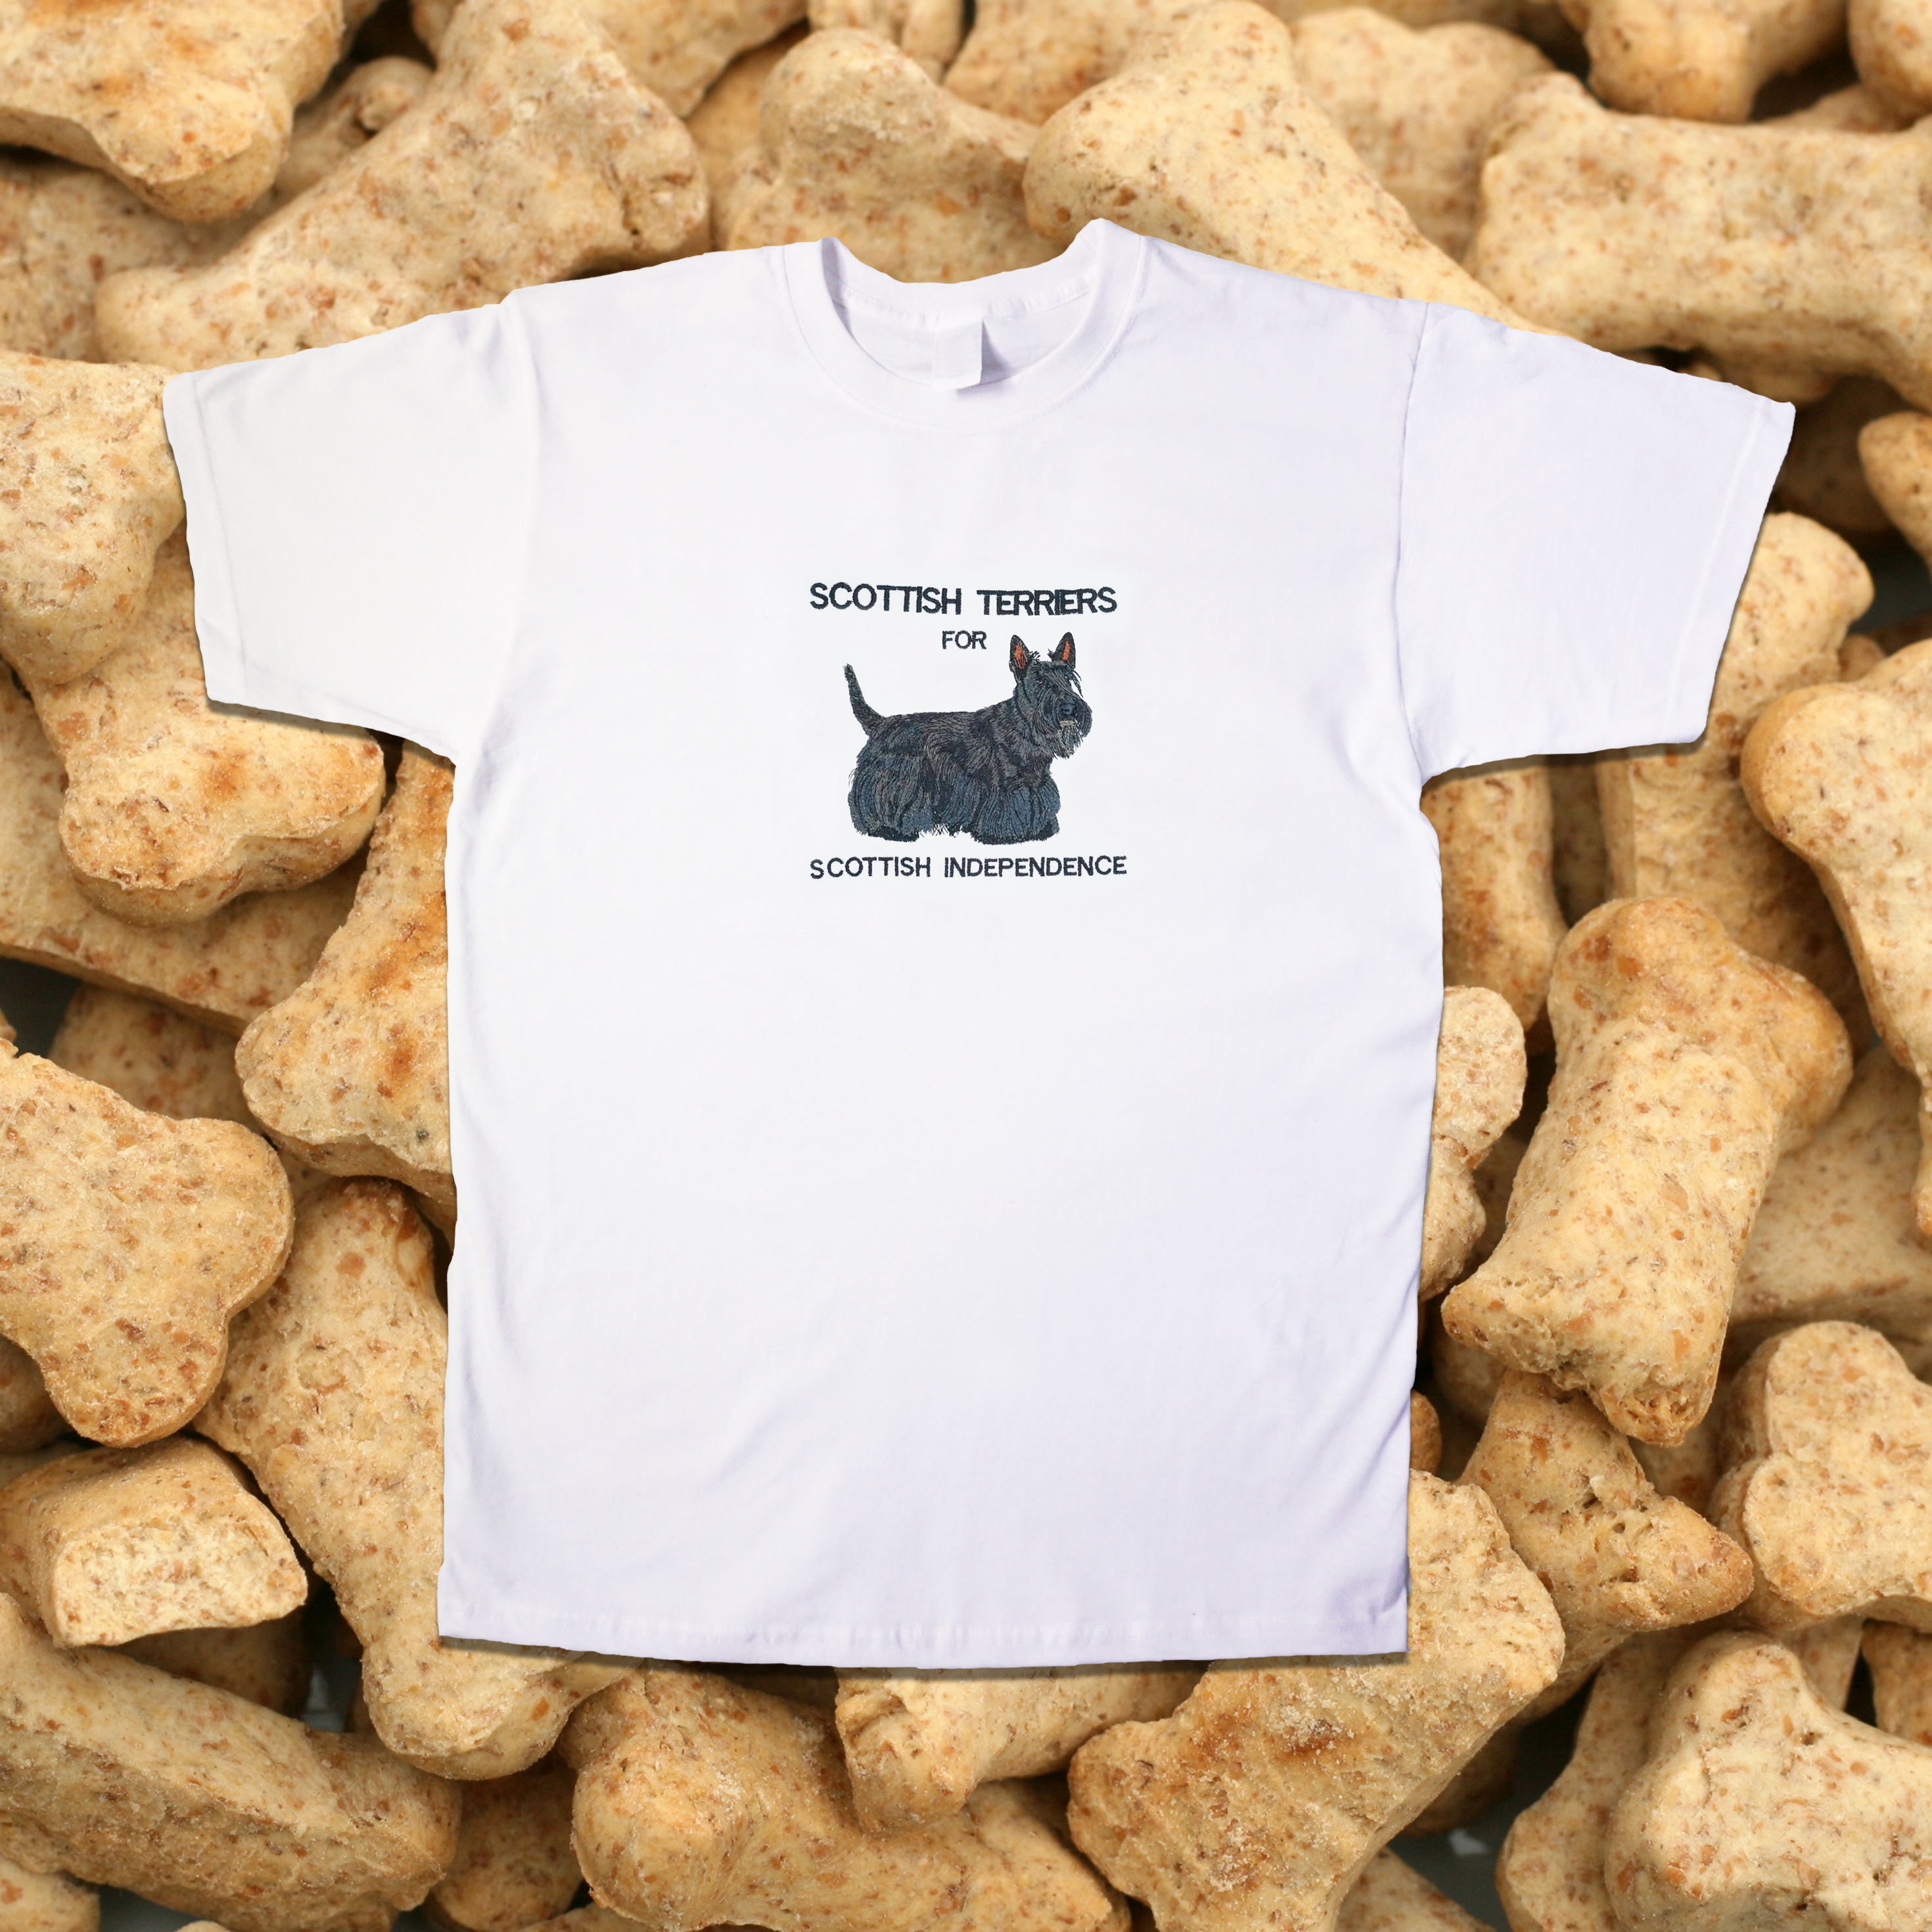 SCOTTISH TERRIERS FOR SCOTTISH INDEPENDENCE T-SHIRT